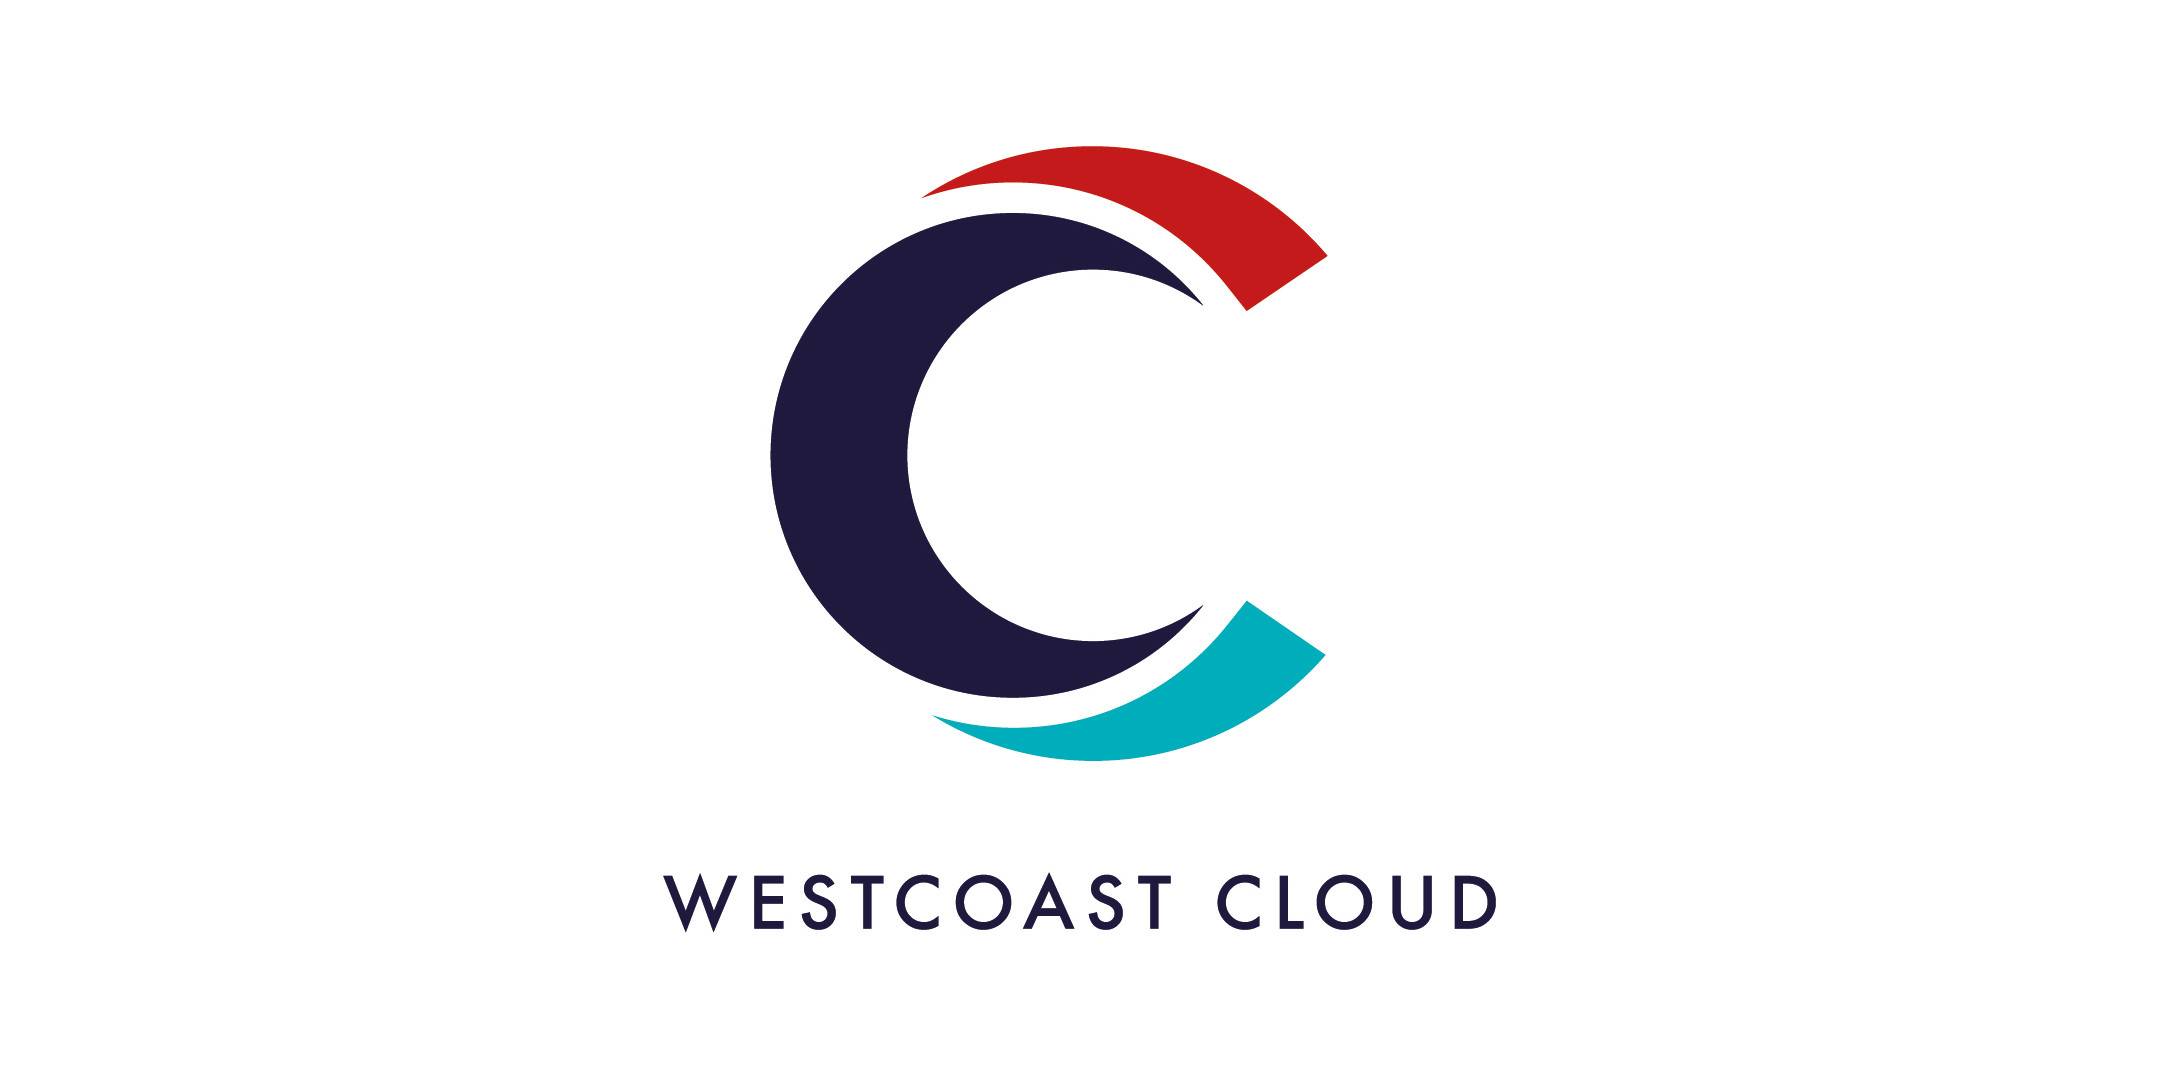 Trustack MSP Cyber Security, IT Services, IT Support. The image features the logo of Westcoast Cloud, displaying a large, stylized letter "C" with segments in dark blue, red, and teal. Below the "C," the text "Westcoast Cloud" appears in dark blue capital letters. The background is white.